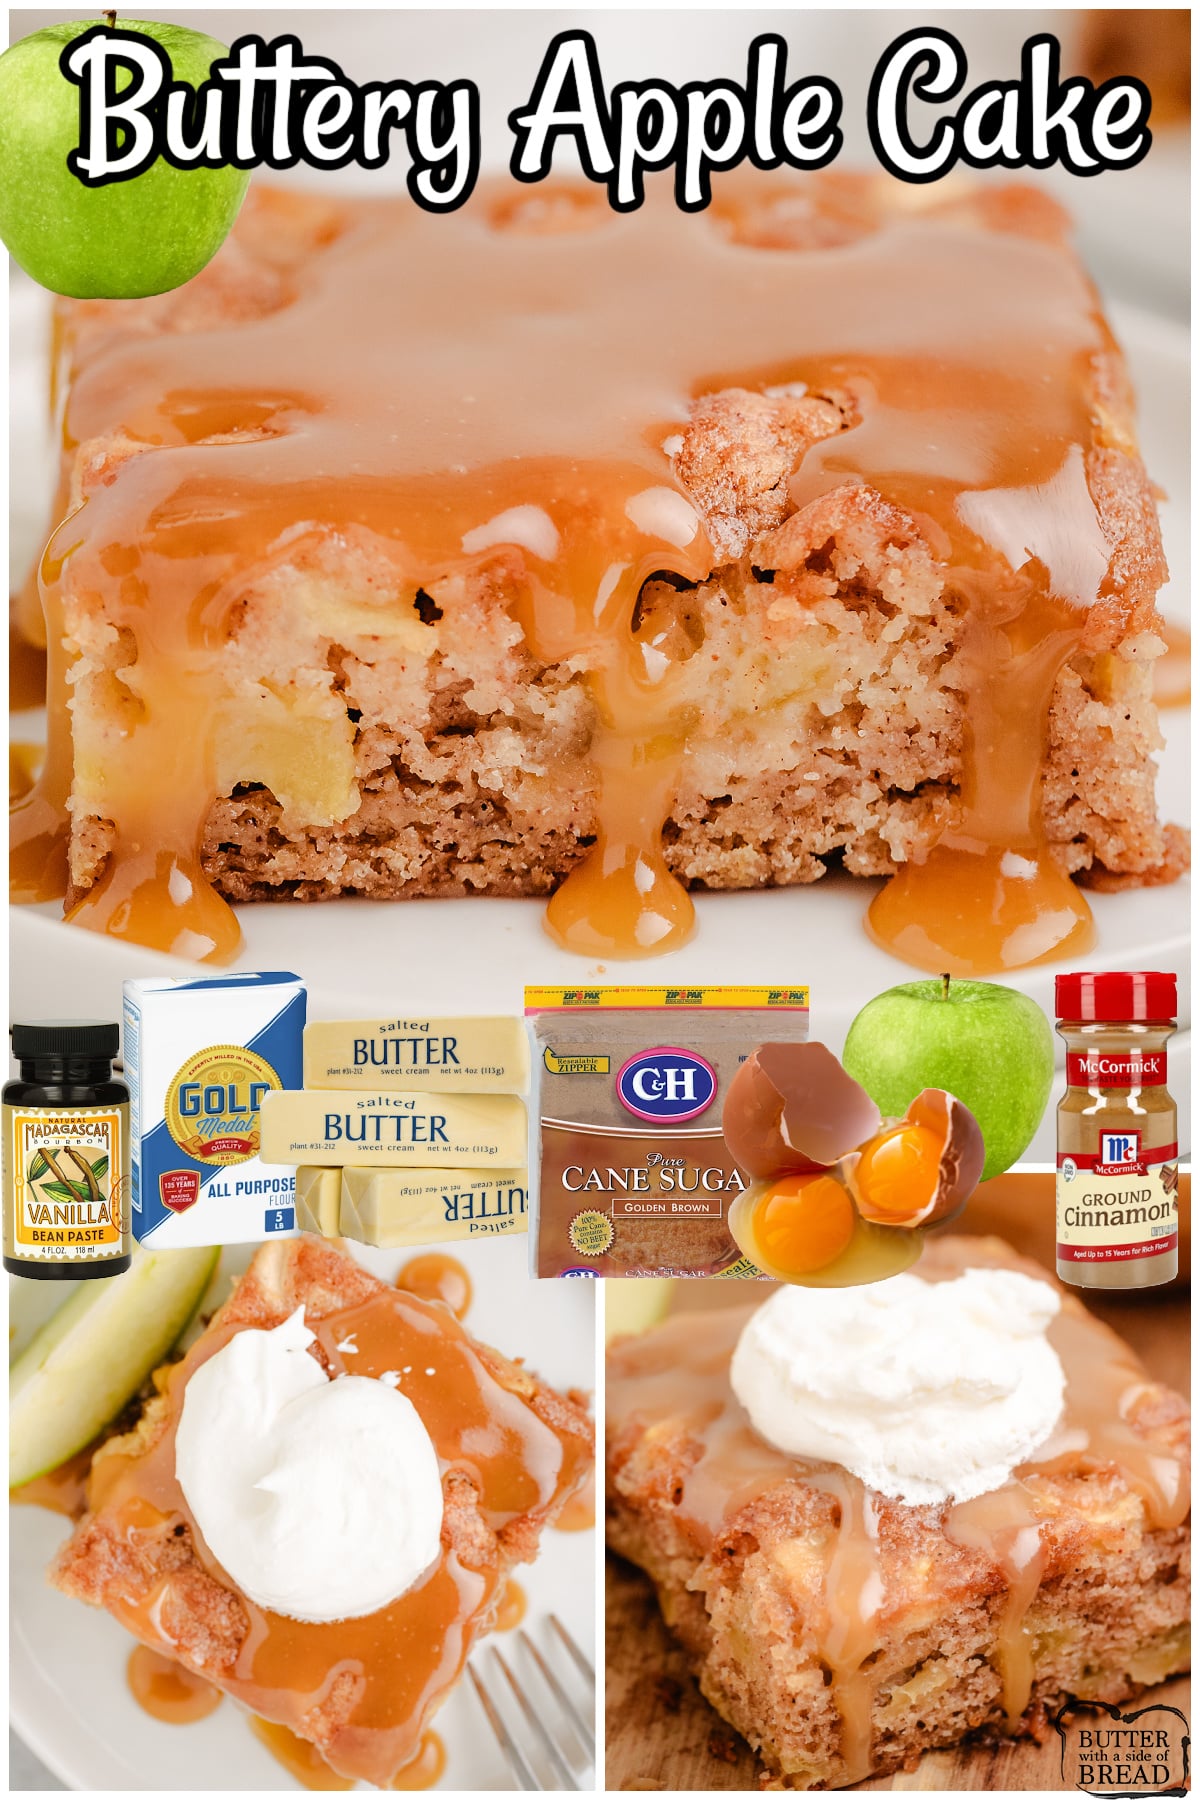 Buttery Apple Cake made with fresh apples & warm spices in a rich, buttery batter, then baked & topped with a simple caramel sauce! Perfect apple cake for Fall!